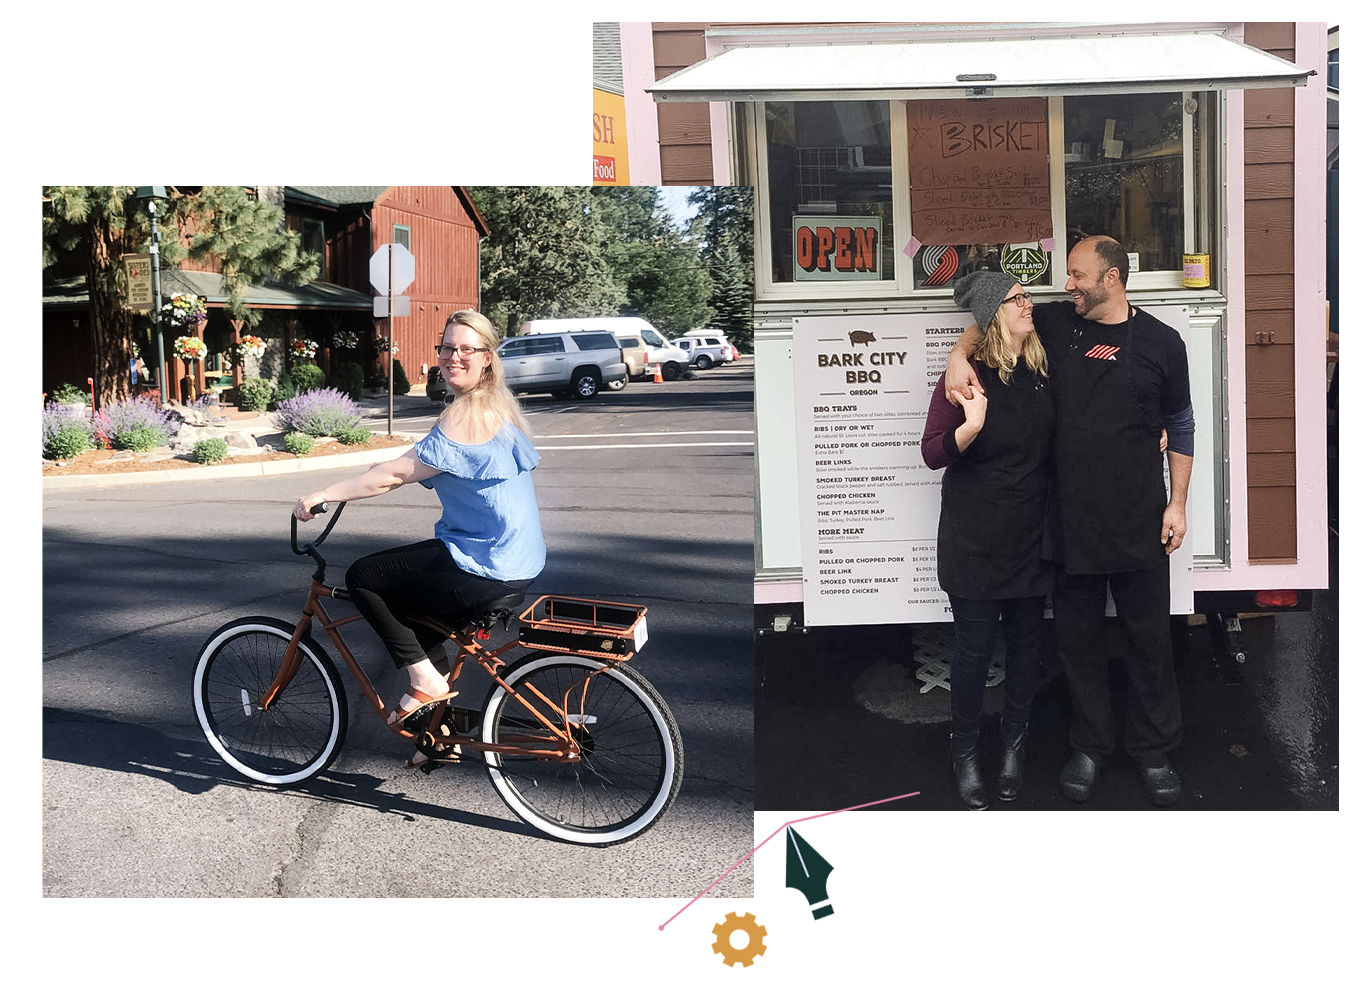 Two photos, the one on the left is of jehn riding her bike and the one on the right is her and her husband at their food cart, Bark City BBQ